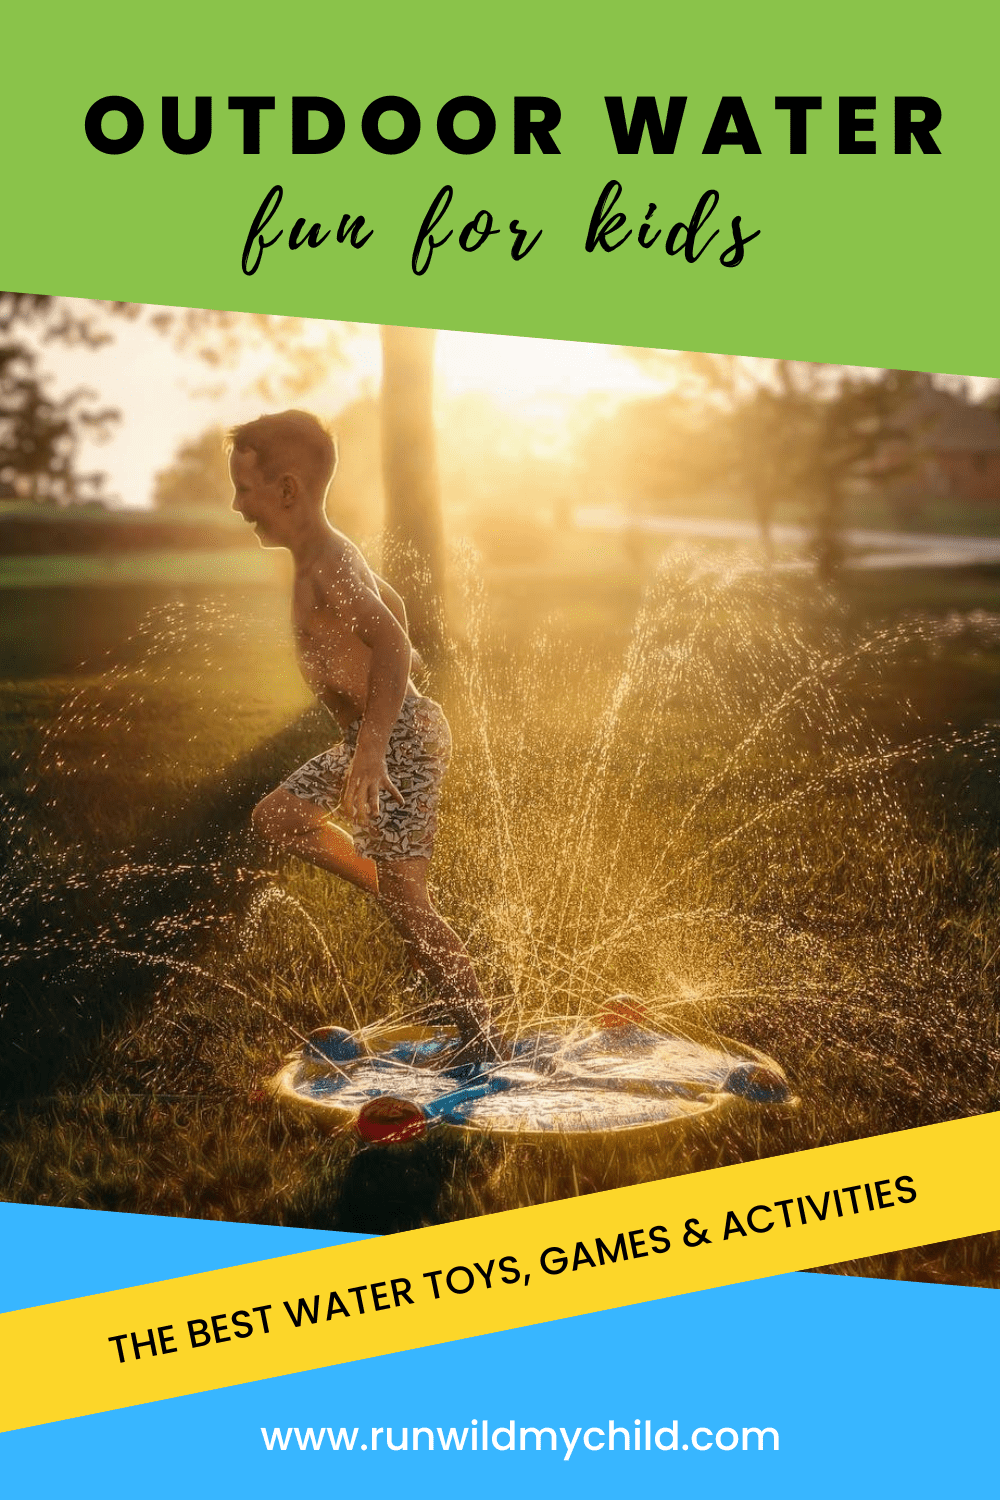 https://runwildmychild.com/wp-content/uploads/2022/09/Outdoor-Water-Fun-for-Kids-The-best-water-toys-water-games-and-water-activities-for-kids.png